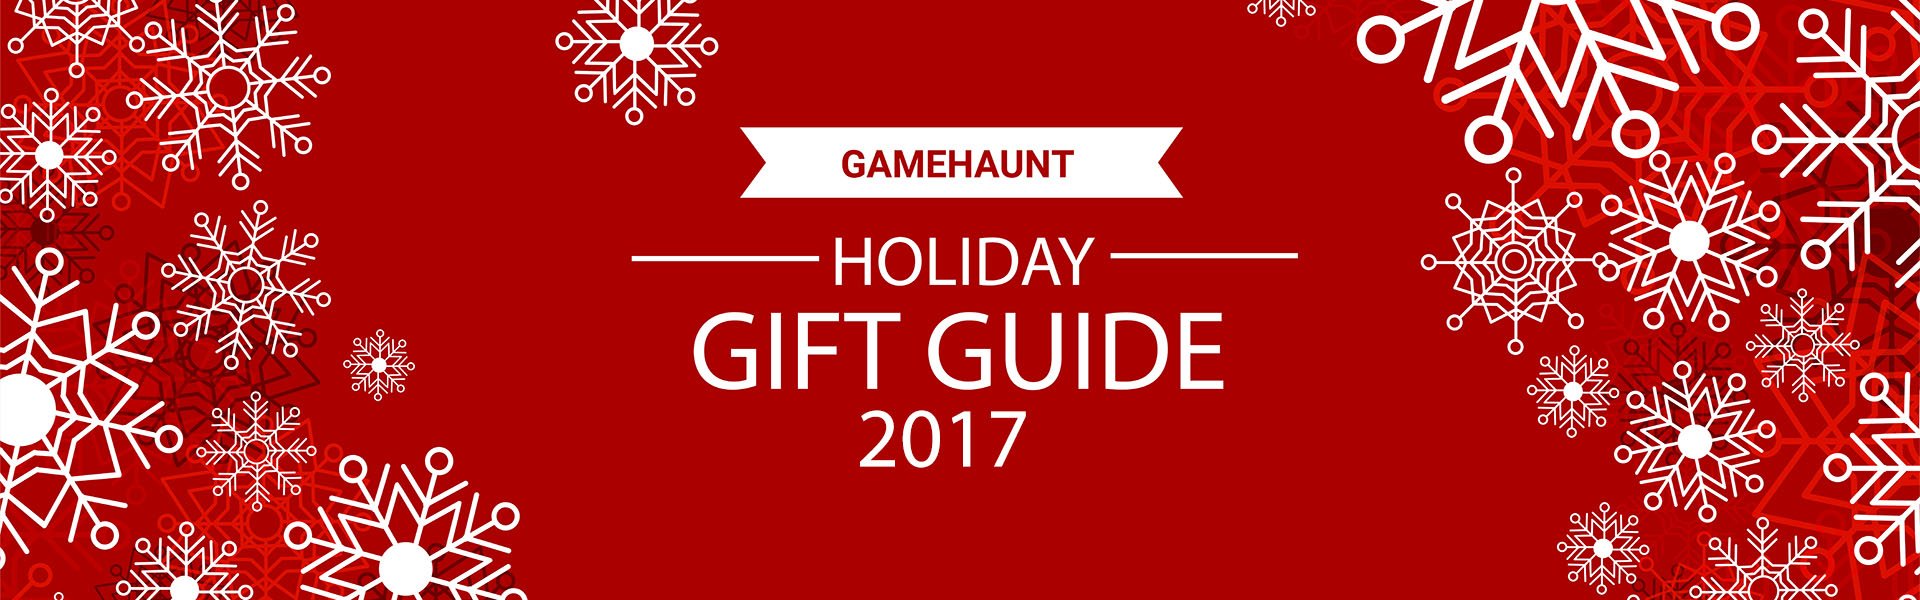 Holiday Gift Guide 2017 9